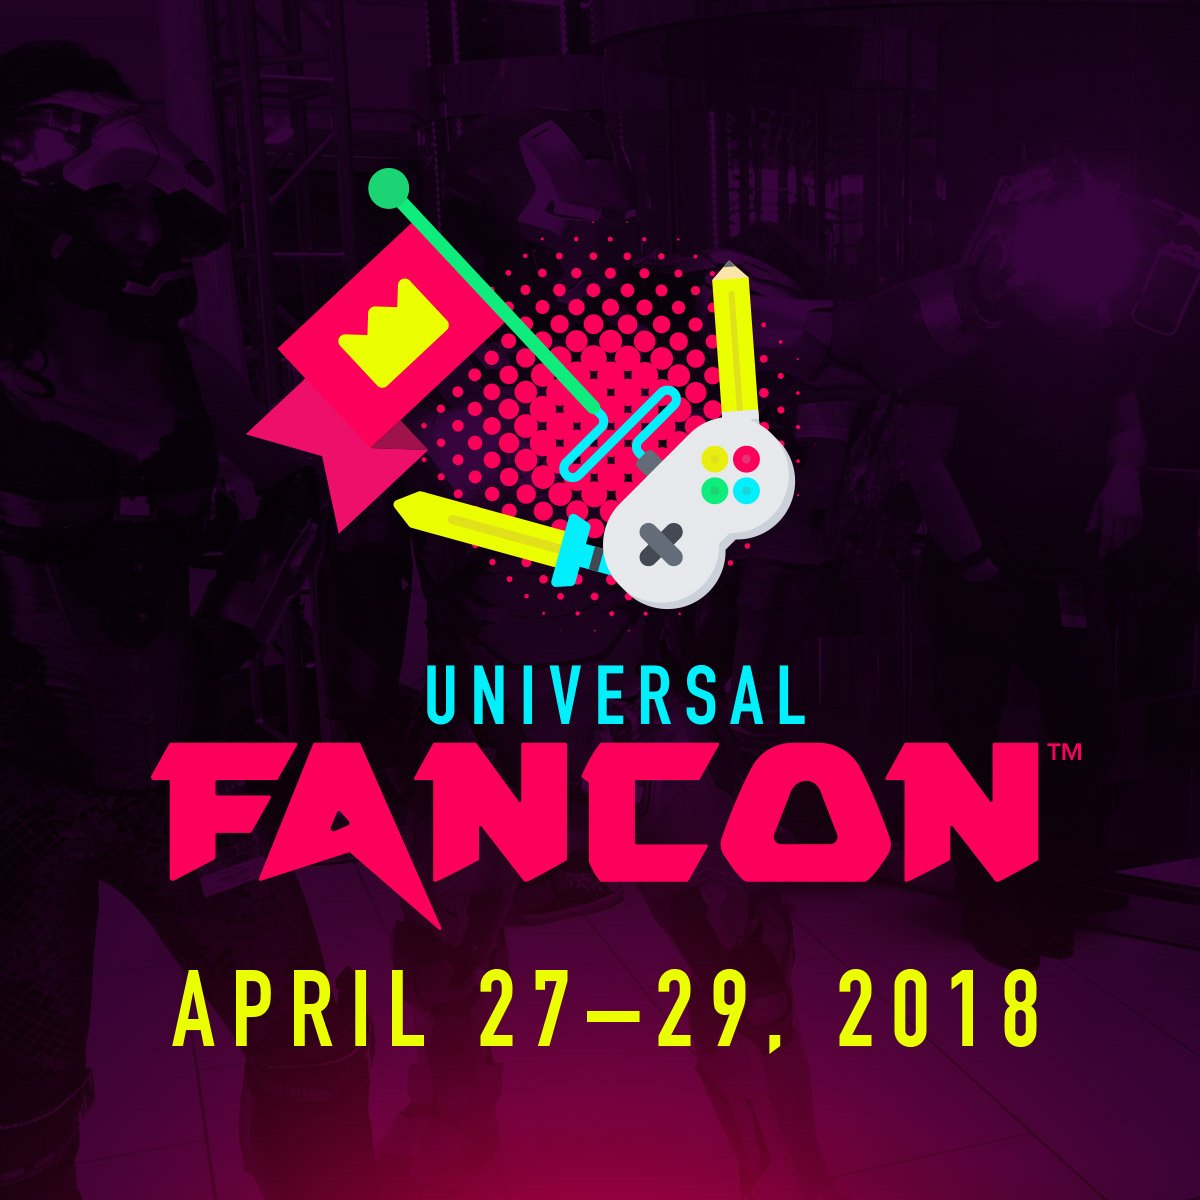 Geek insider, geekinsider, geekinsider. Com,, baltimore's universal fancon promises to be geek gathering for the ages, comics